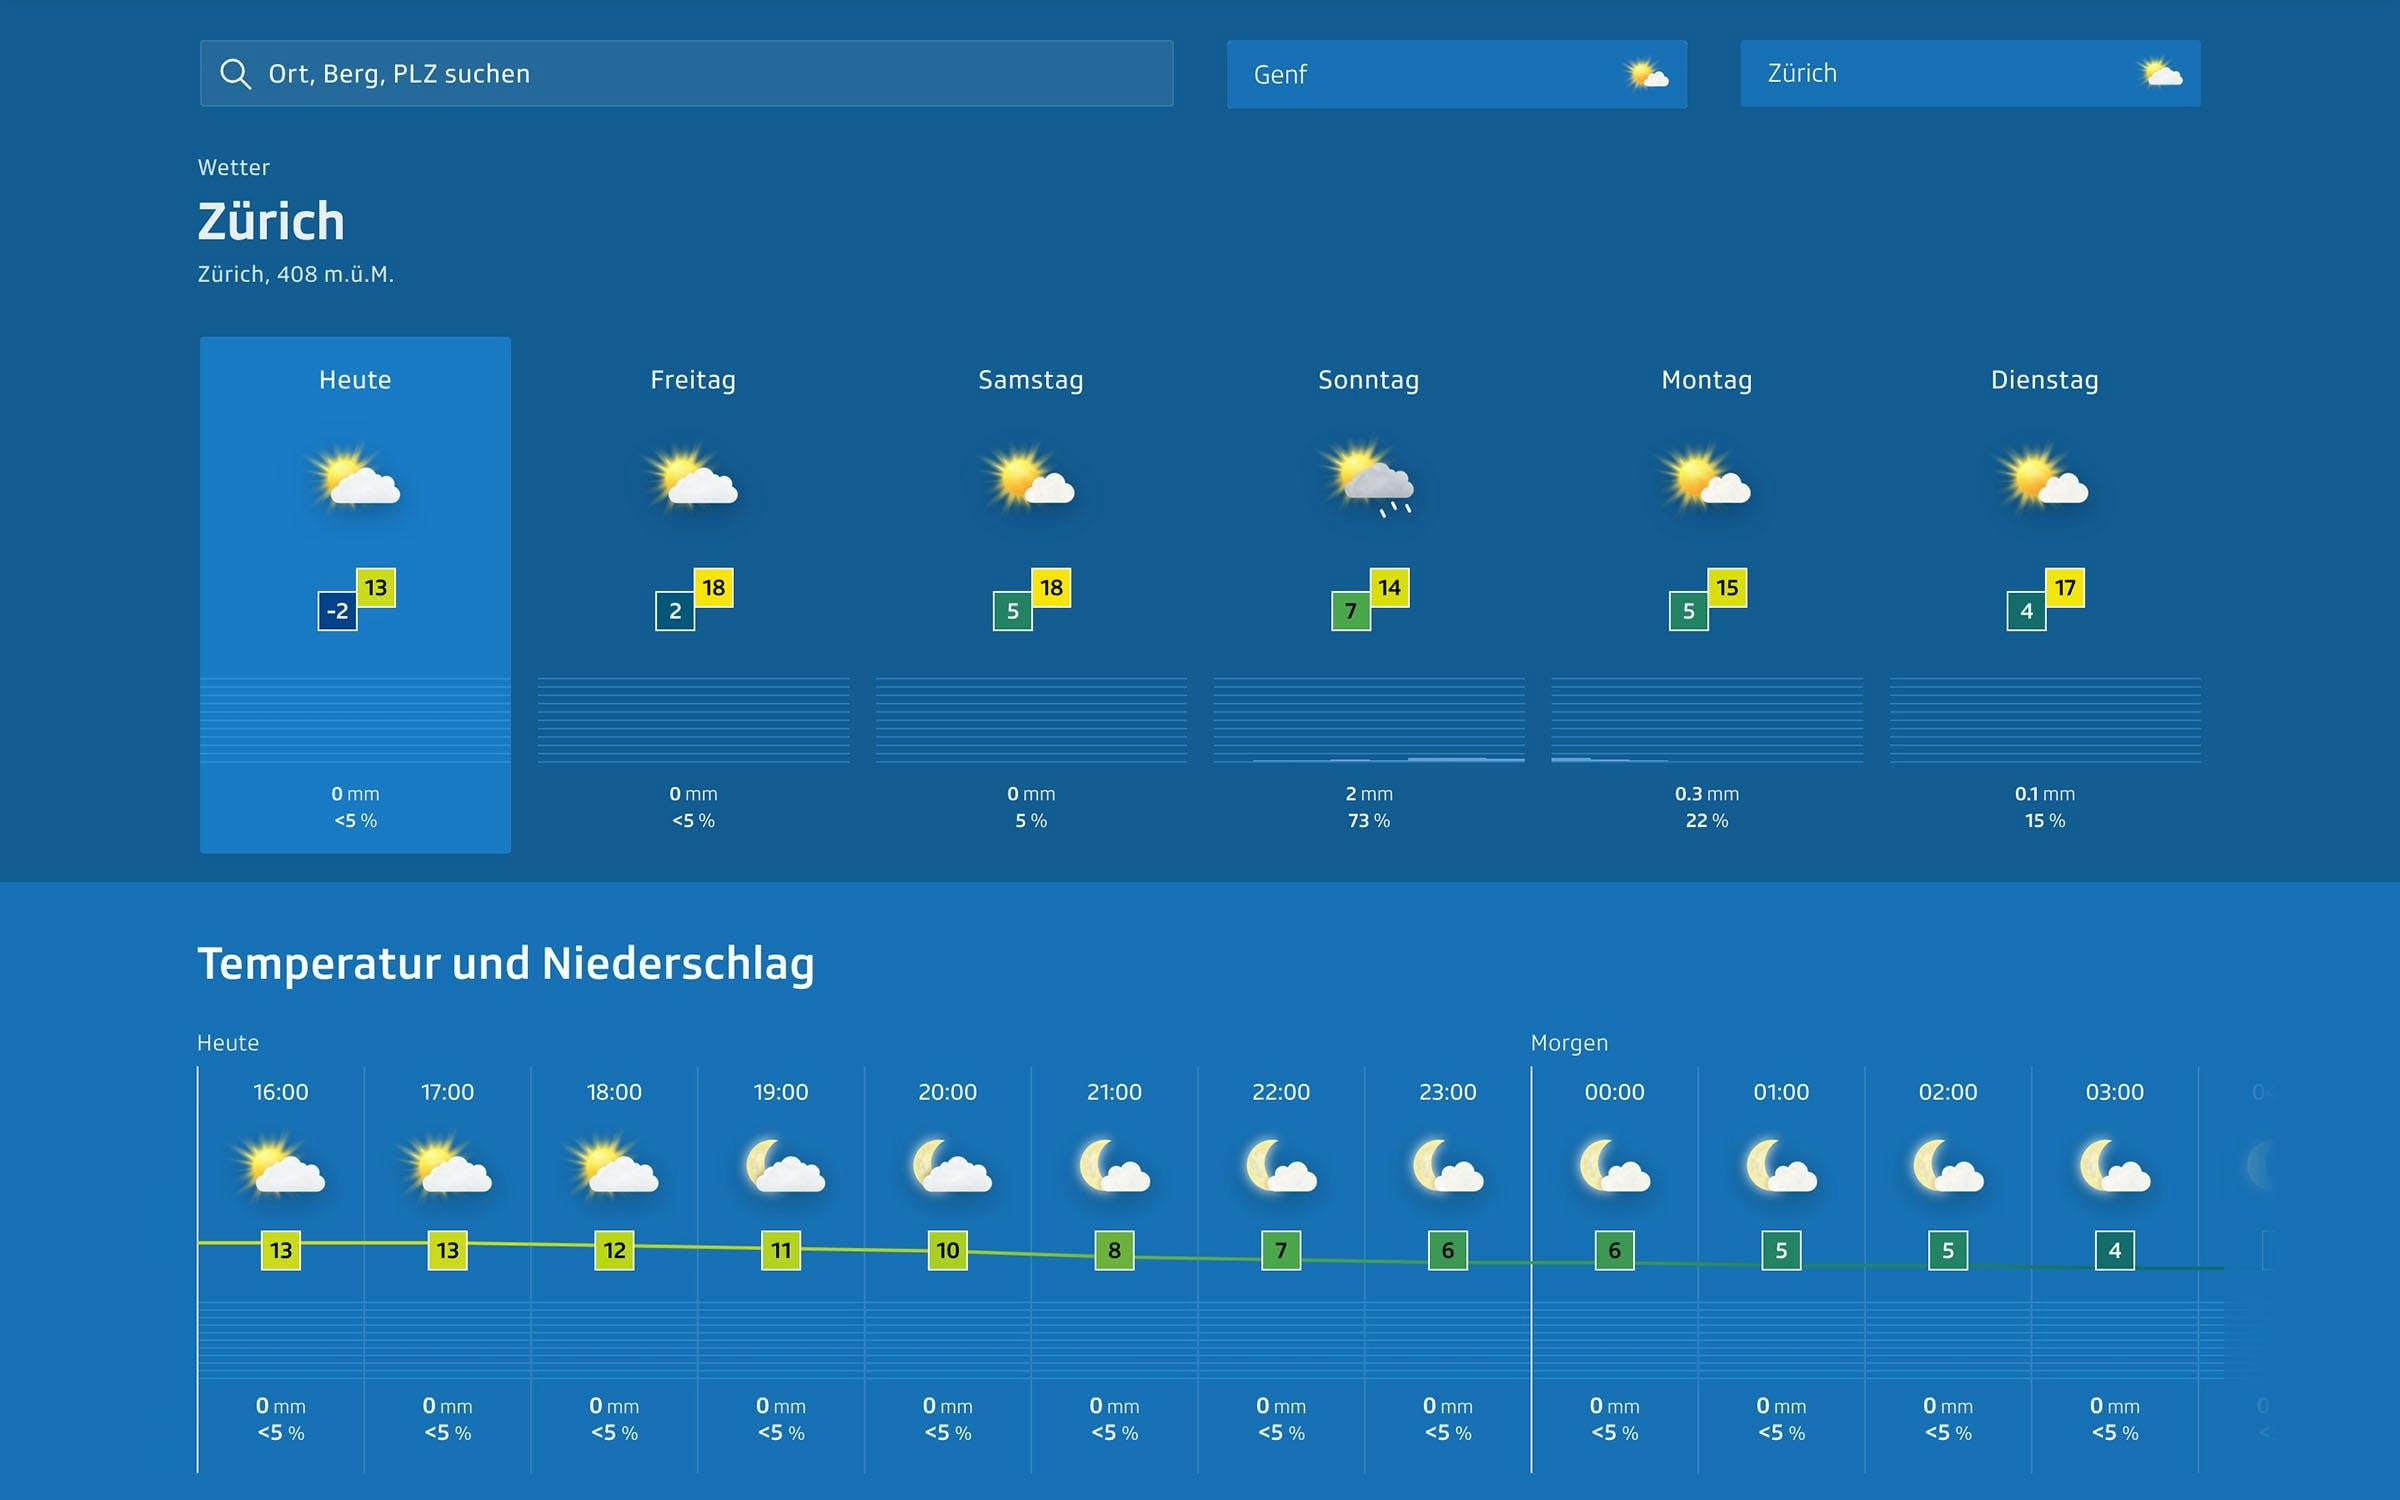 User interface design for weather website showing hourly forecast